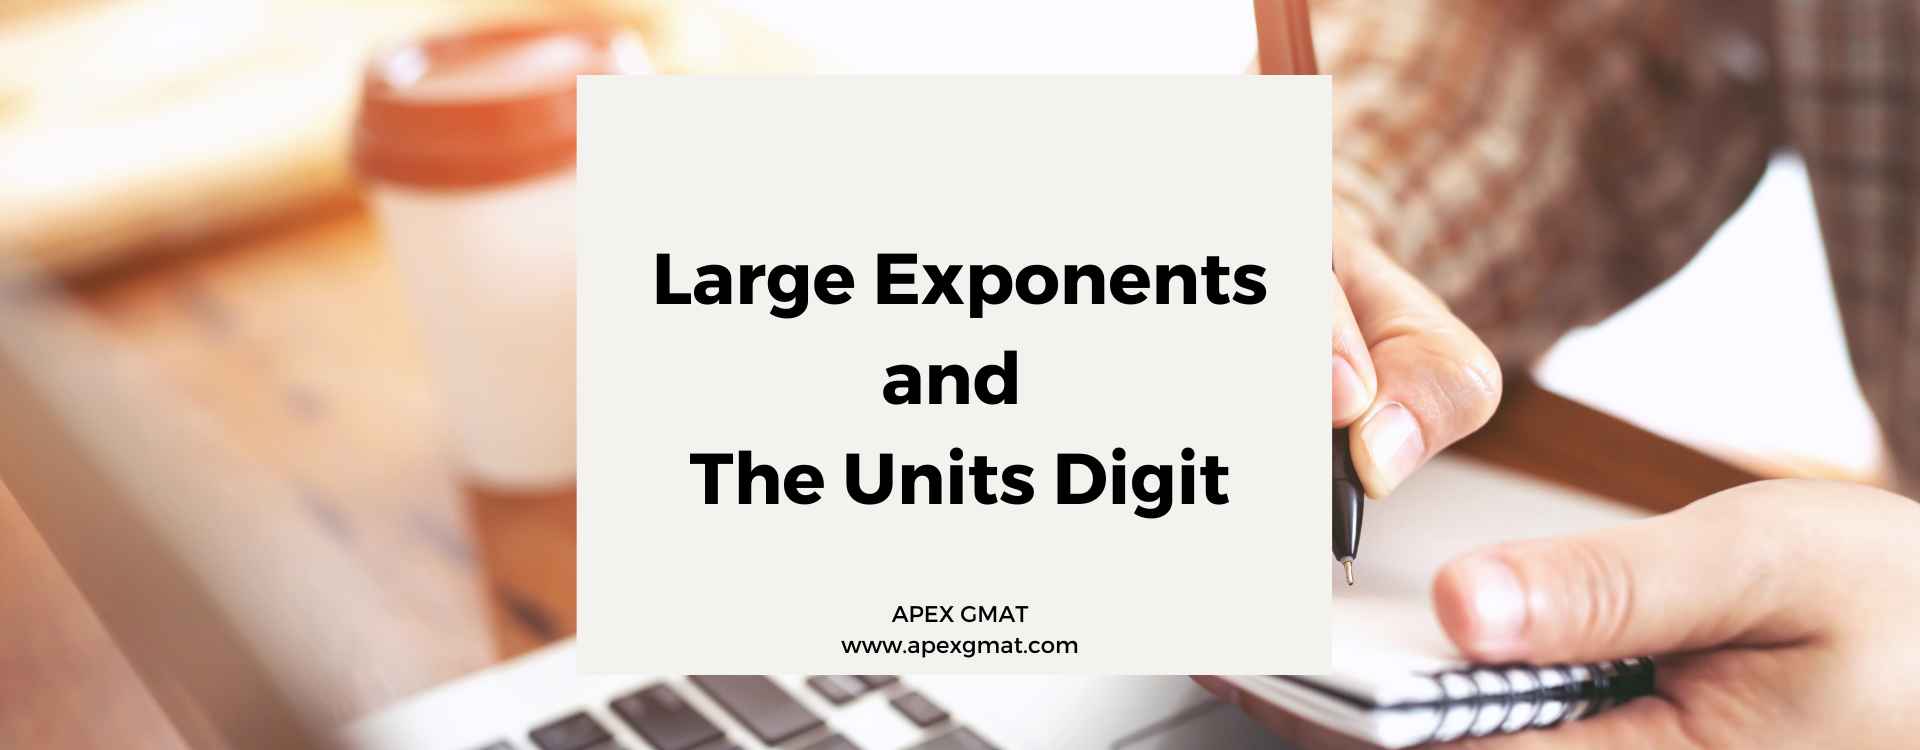 Large Exponents and The Units Digit